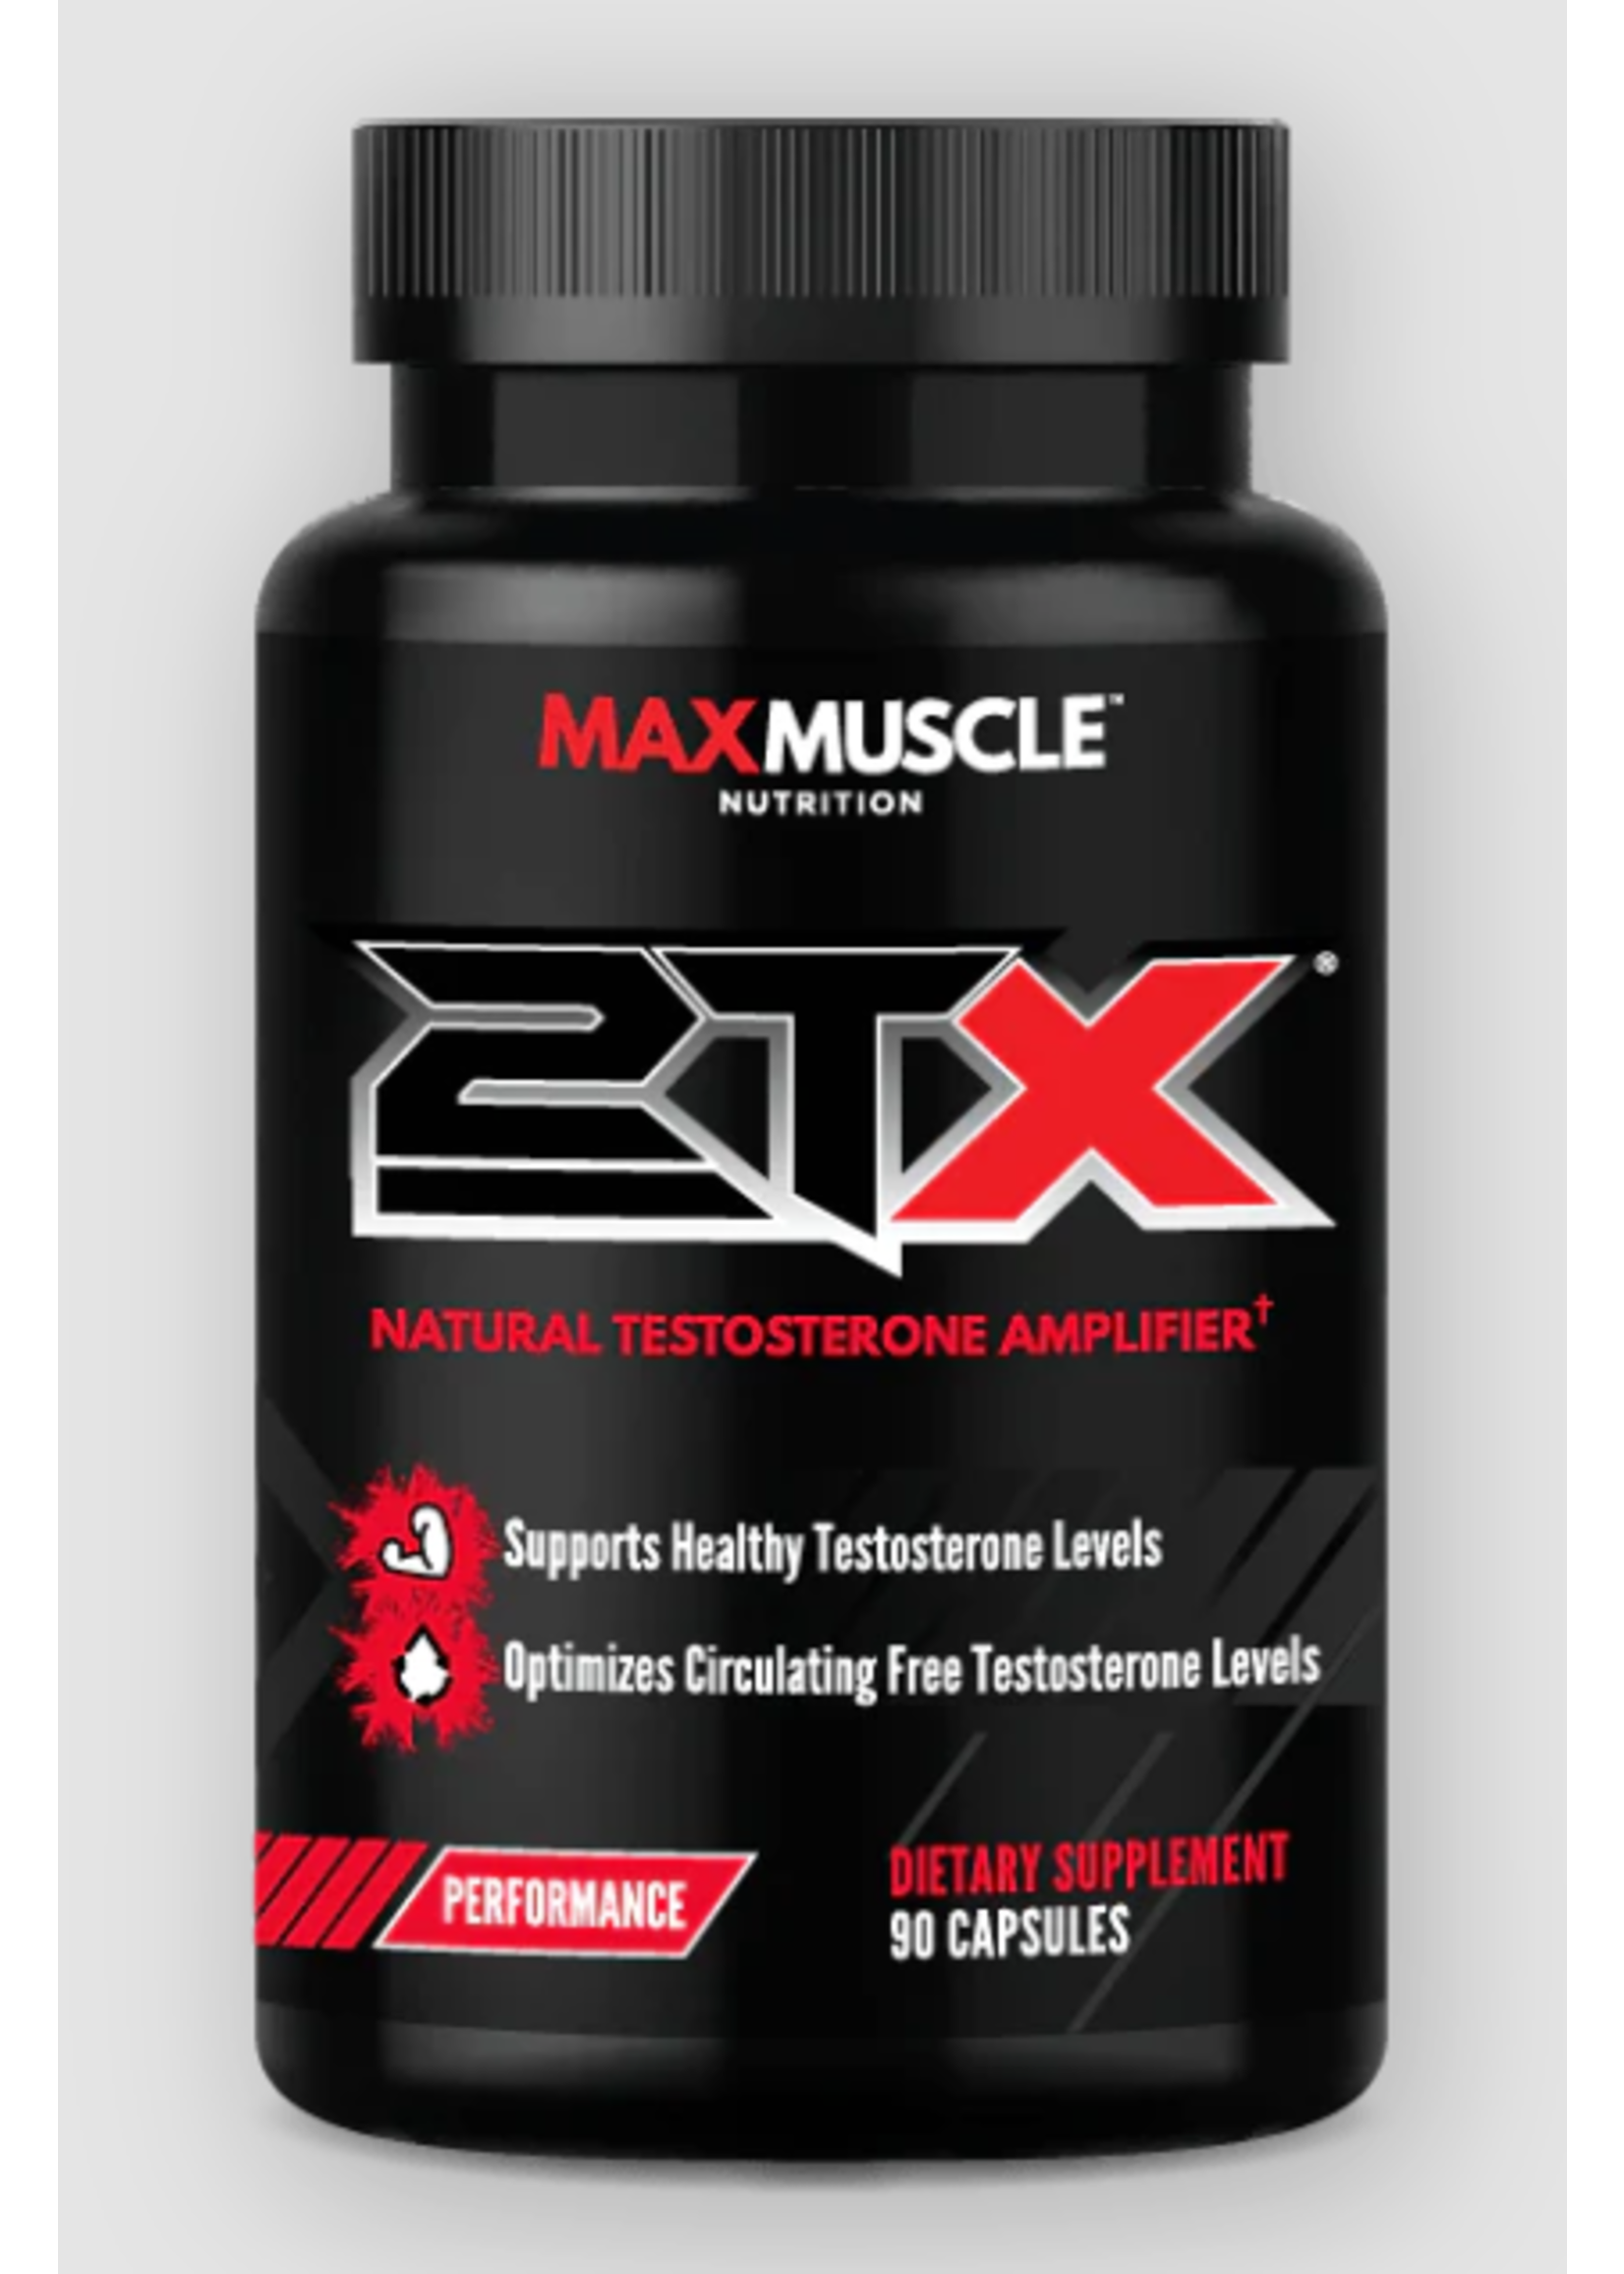 Max Muscle 2TX